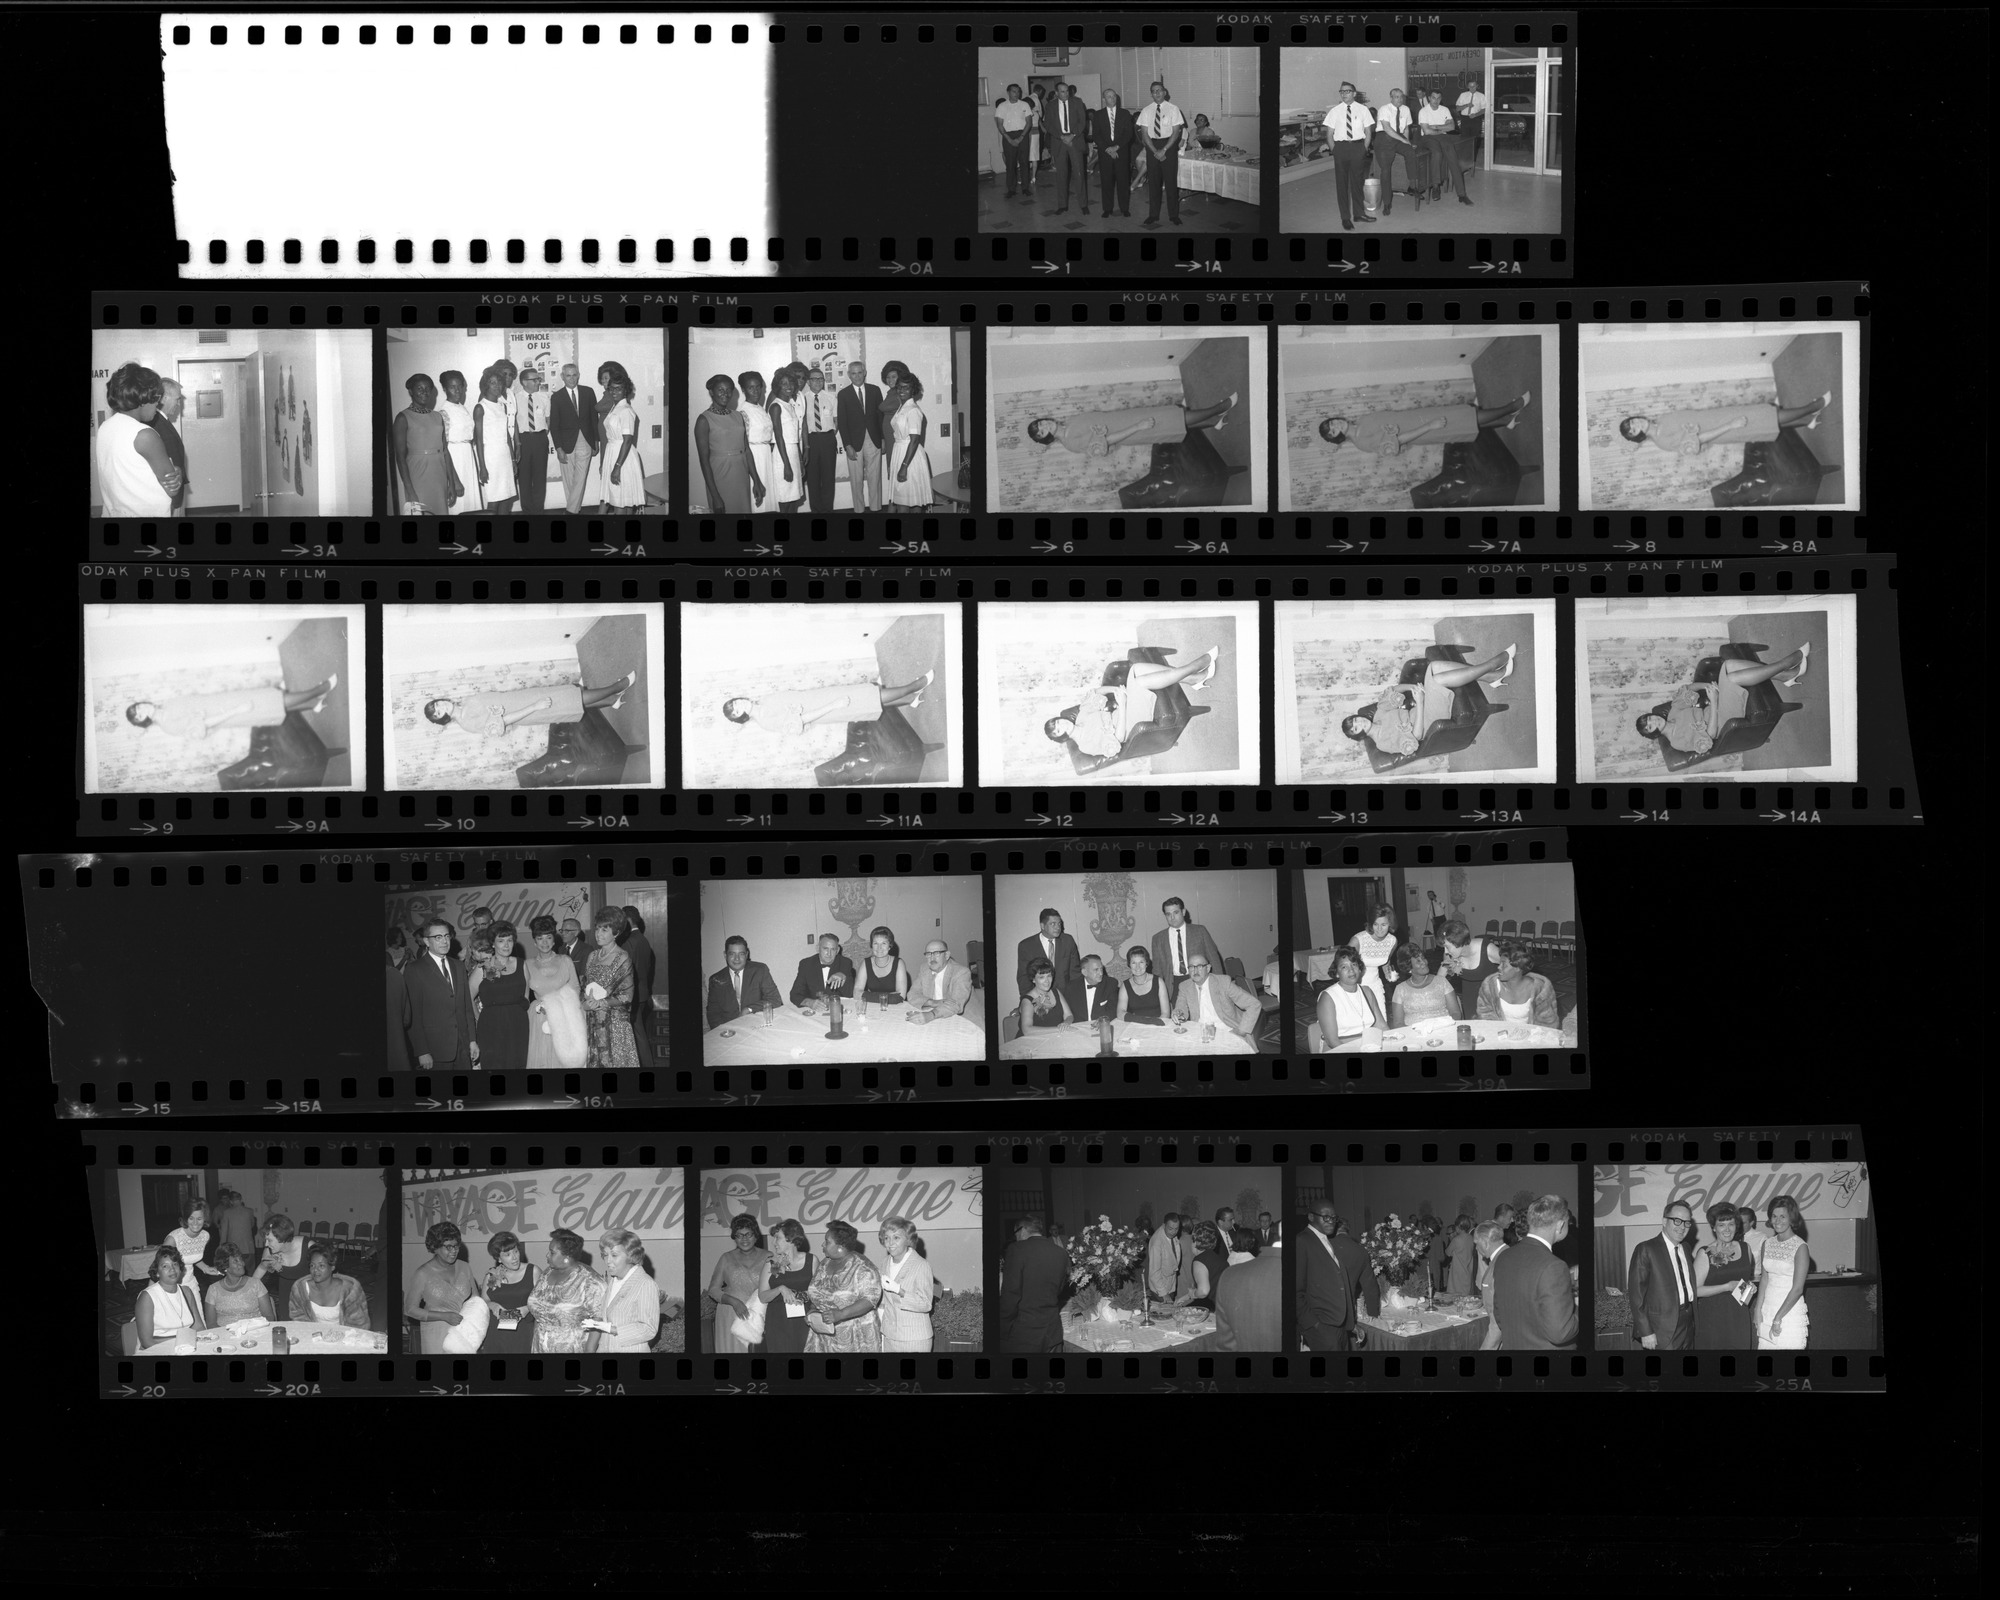 Set of negatives by Clinton Wright including Yolanda McKinney, Governor Sawyer at Centers, Elaine Brookman's party, and sorority women, 1966, page 1